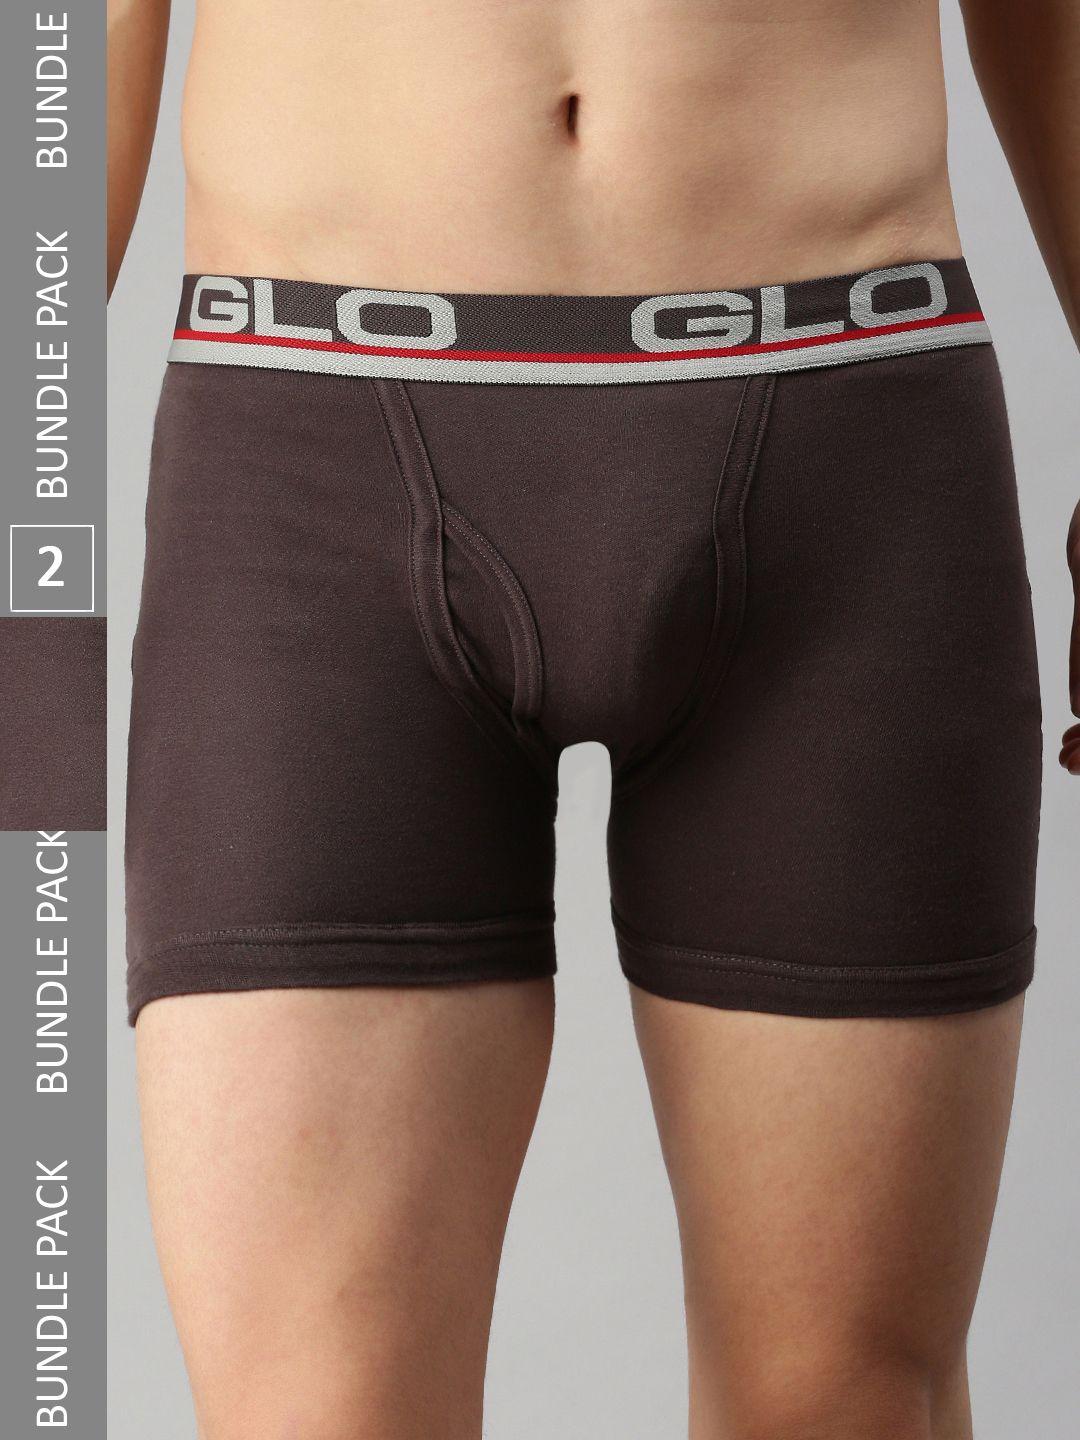 lux cozi pack of 2 mid-rise outer elastic trunks cozi_glo_intlock_cof_2pc